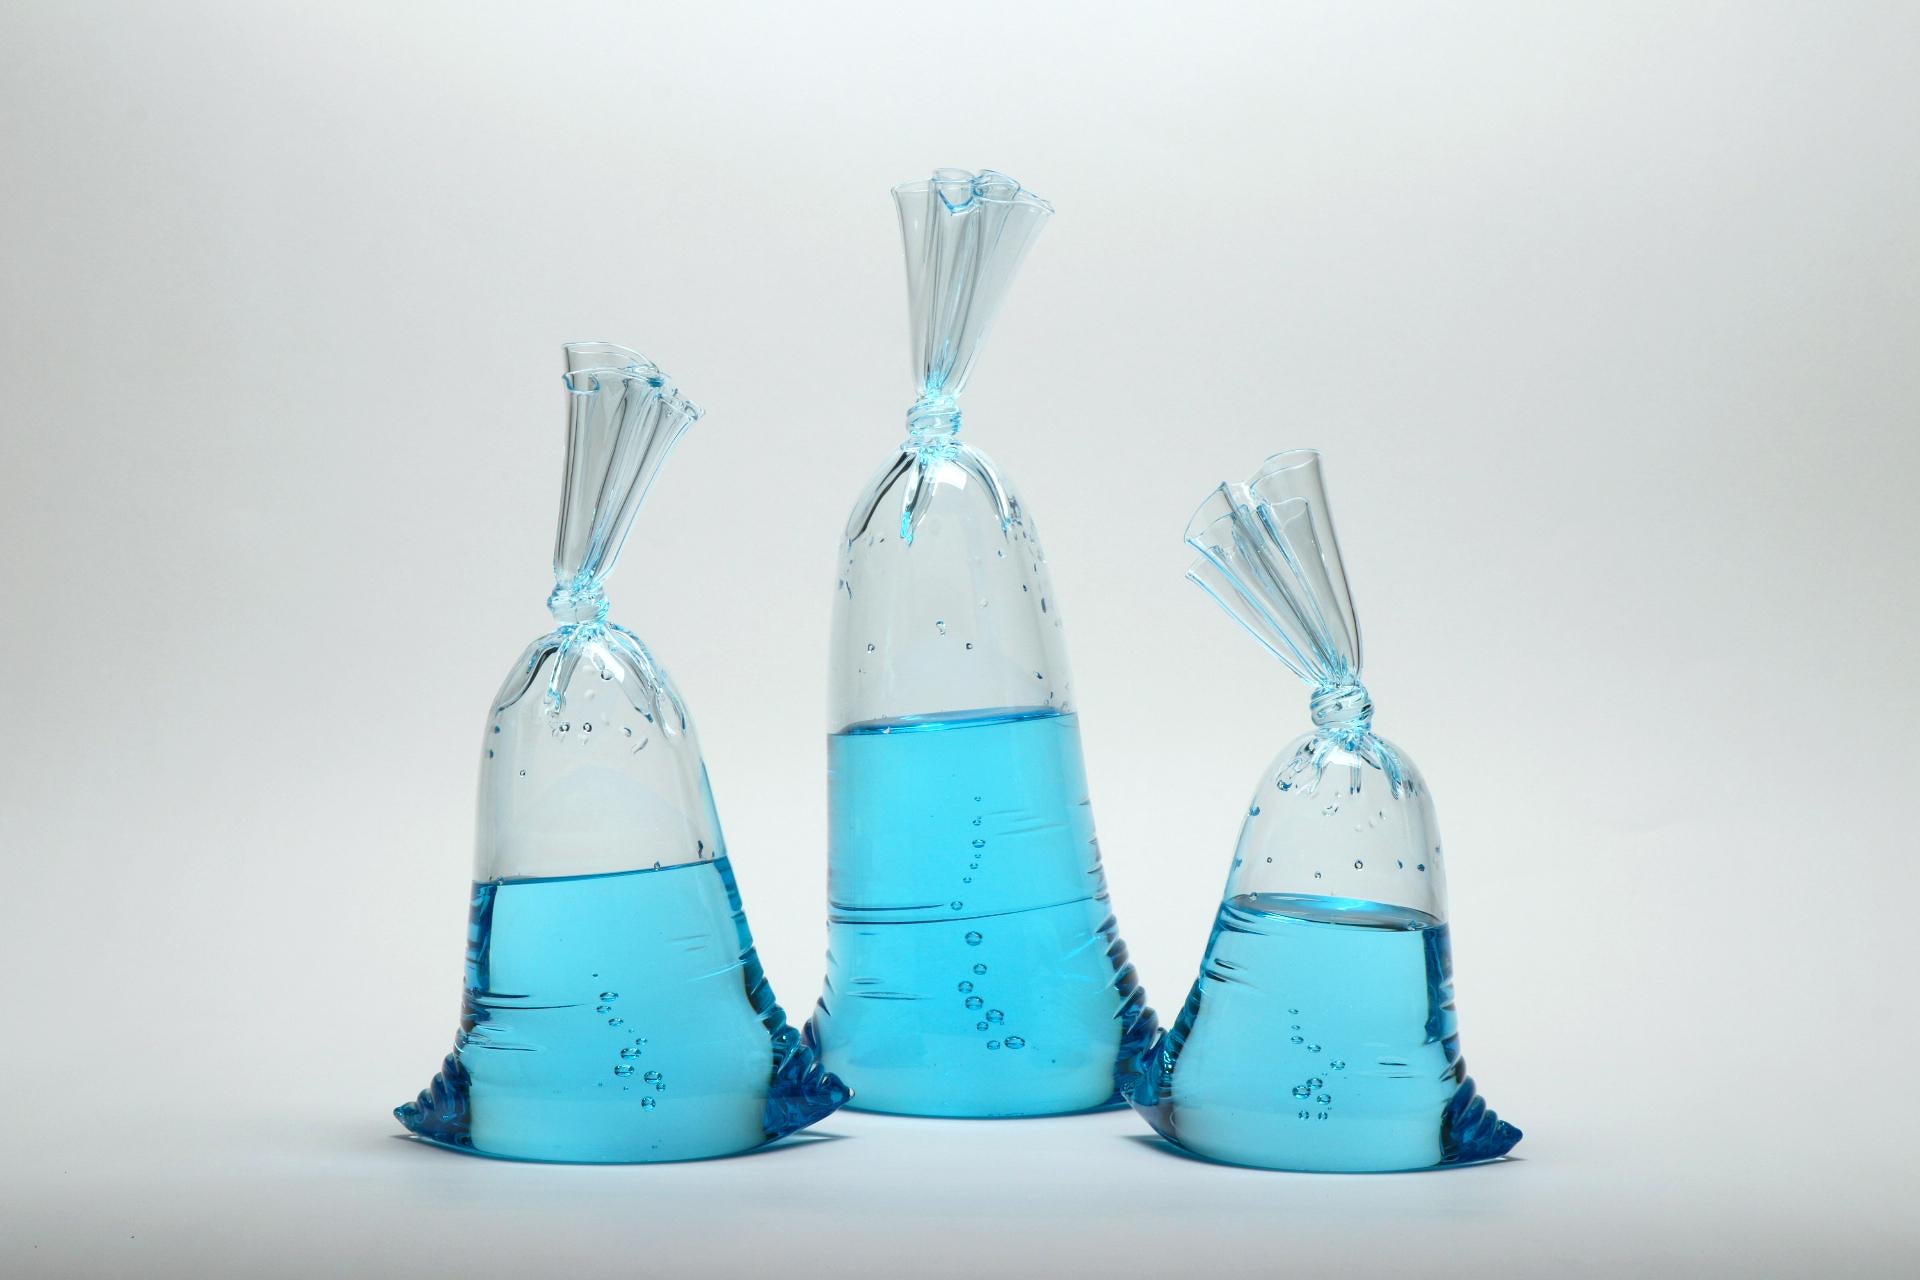 NEW RELEASE! Blue Series - Hyperreal small blue water bag glass sculpture, solid and hollow glass by Dylan Martinez. Size: 14.75 x 7.5 x 4.75”

Dylan Martinez' hyperreal sculptures are hot sculpted glass, hand molded entirely by the artist. The